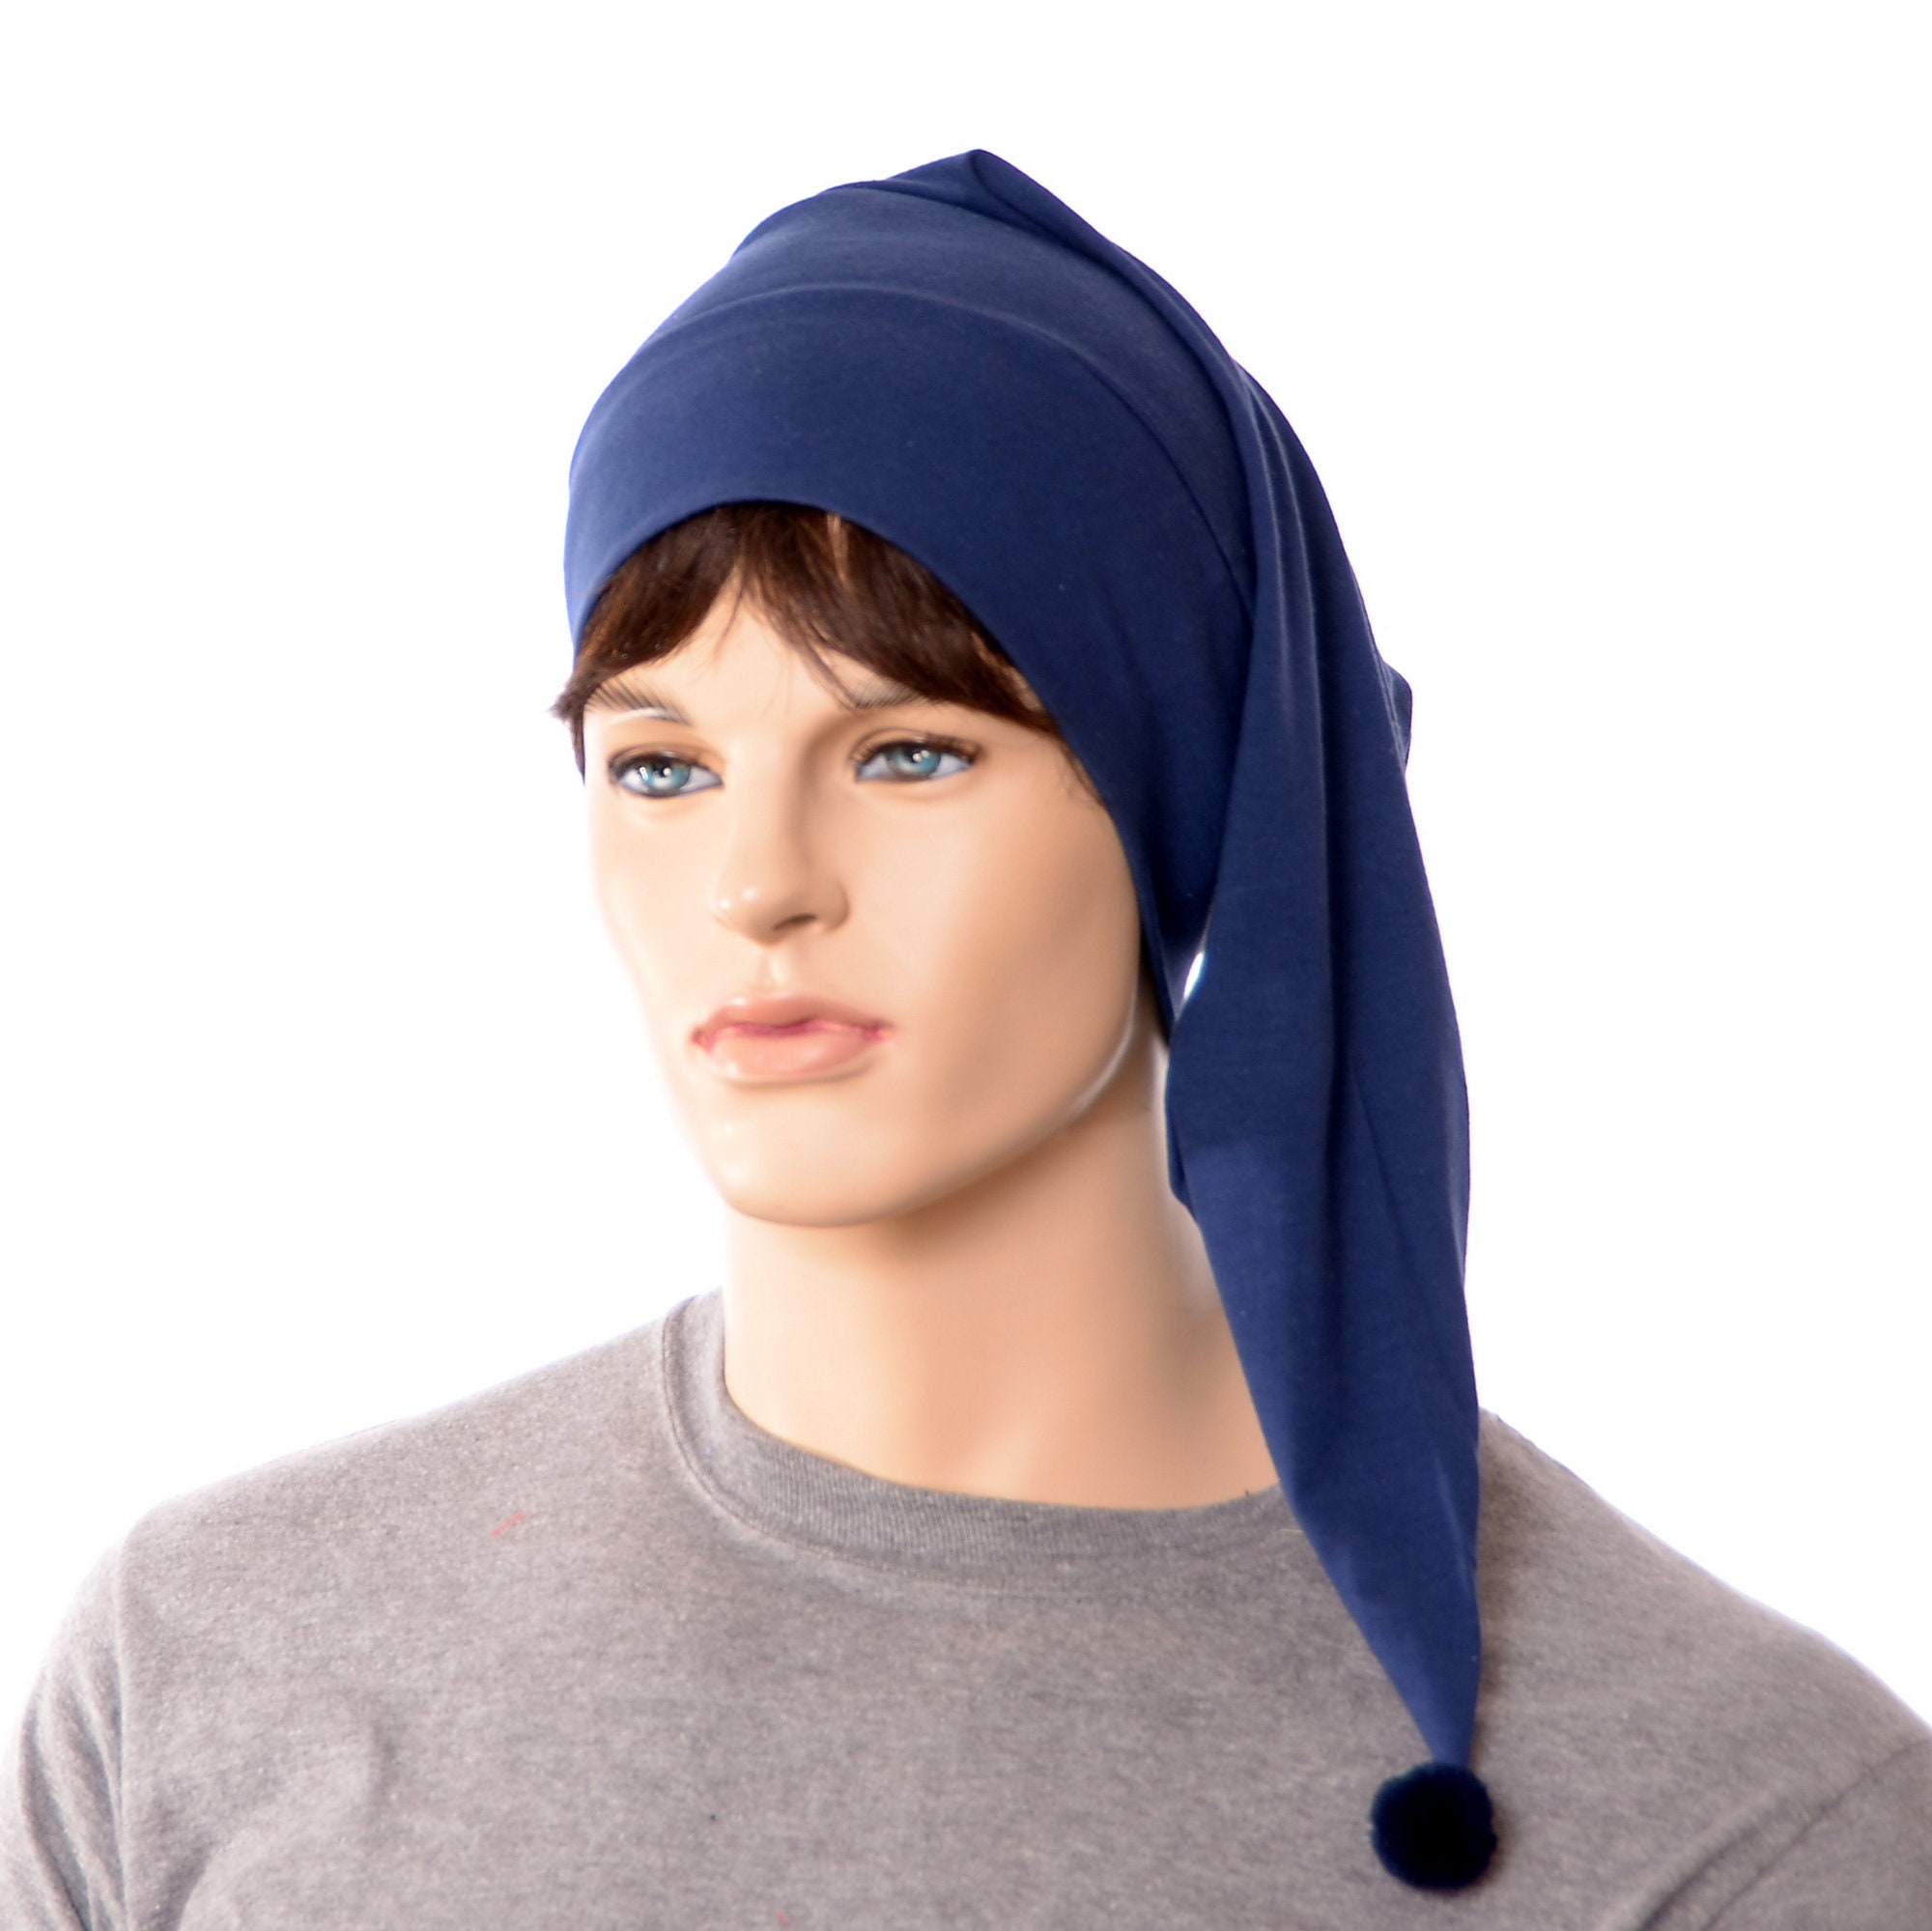 Night Cap Navy Blue Pointed Handmade Nightcap with Pompom Cotton Adult ...